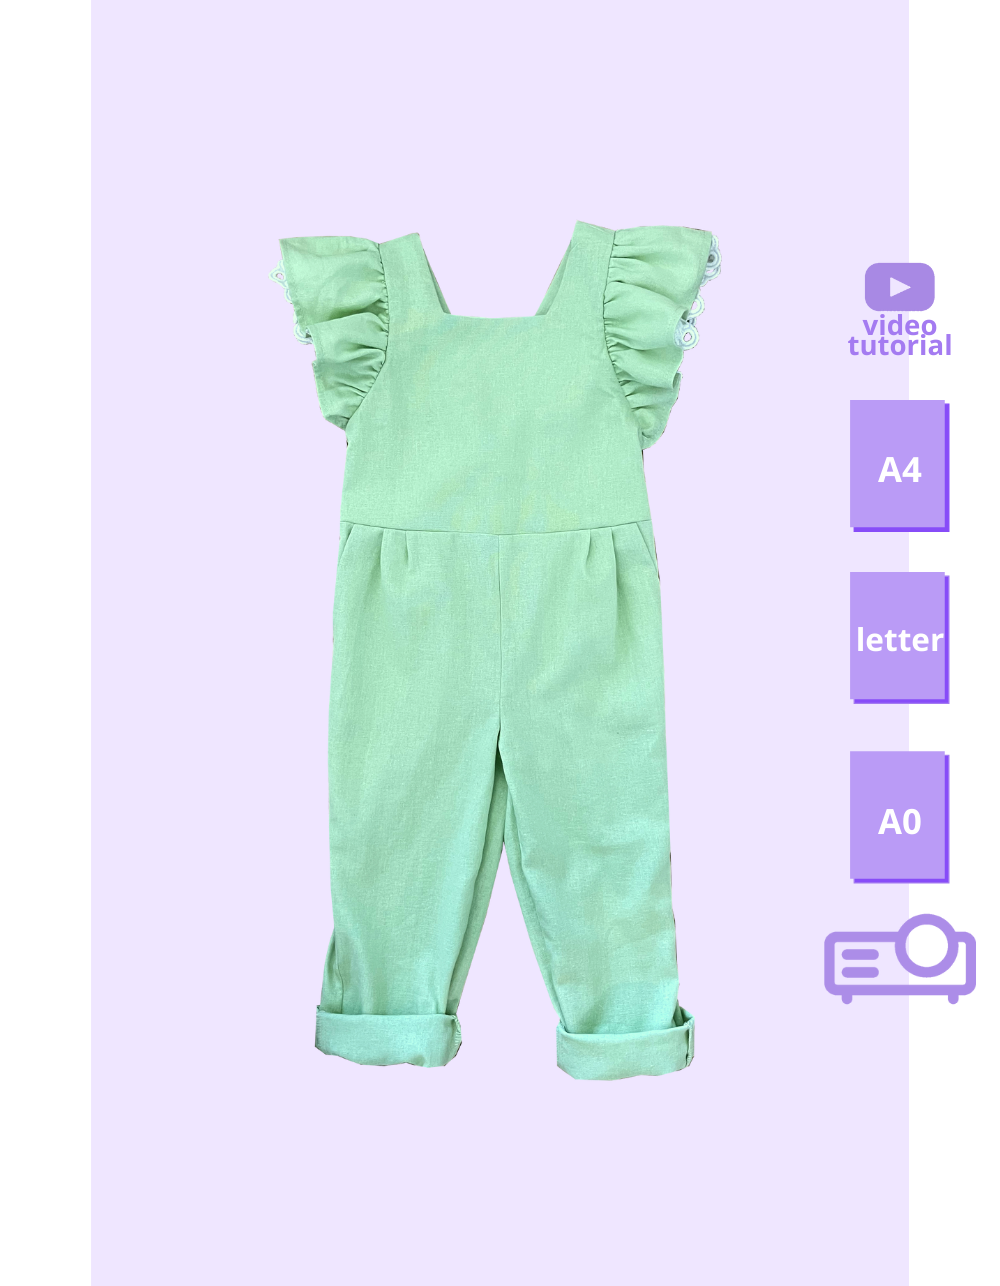 Adult Onesie / Jumpsuit Pattern : 9 Steps (with Pictures